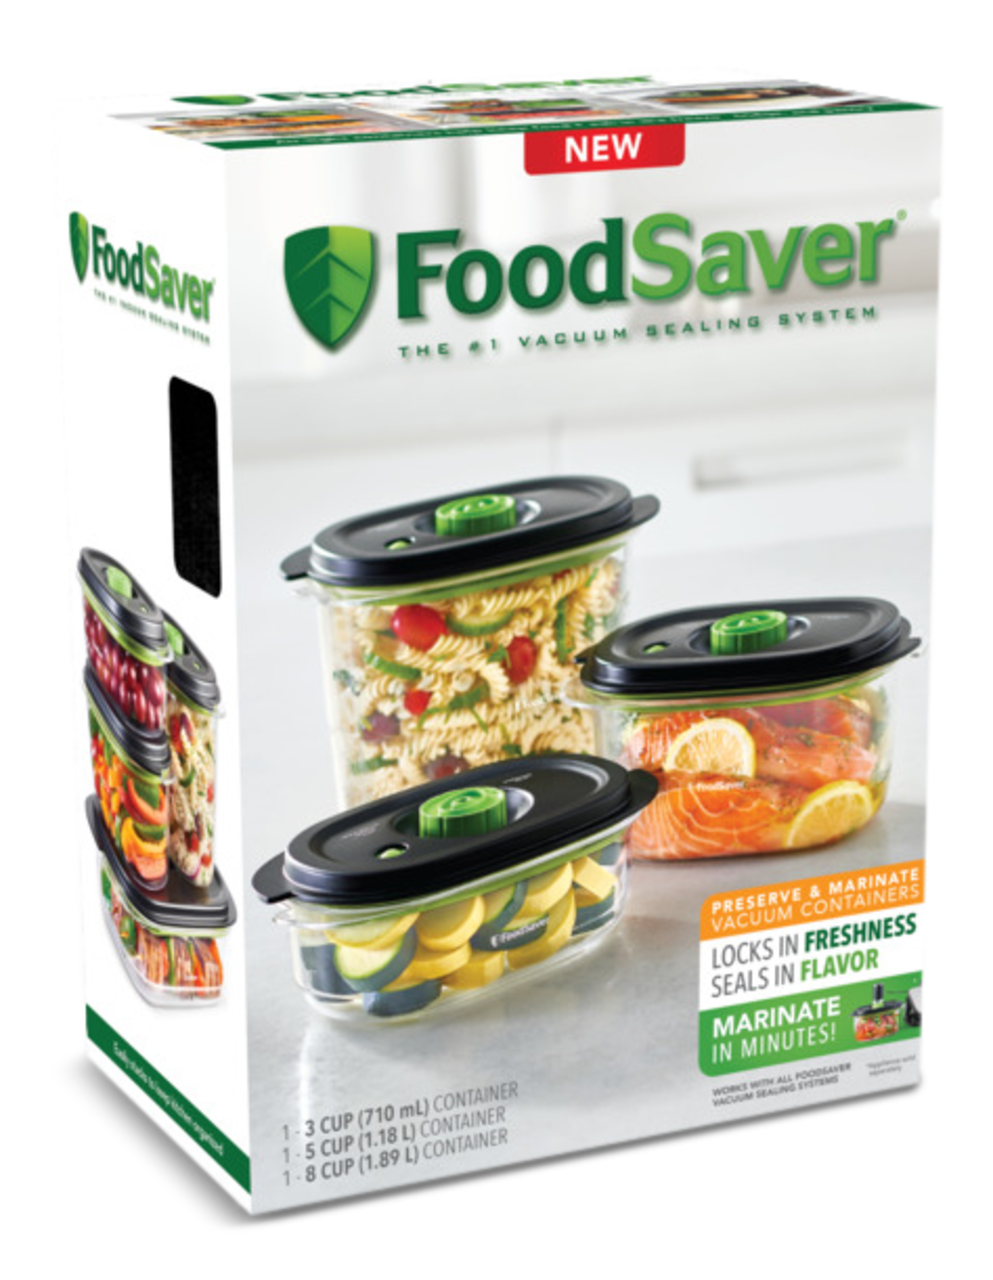 FoodSaver Preserve & Marinate 10 Cup Vacuum Seal Container for